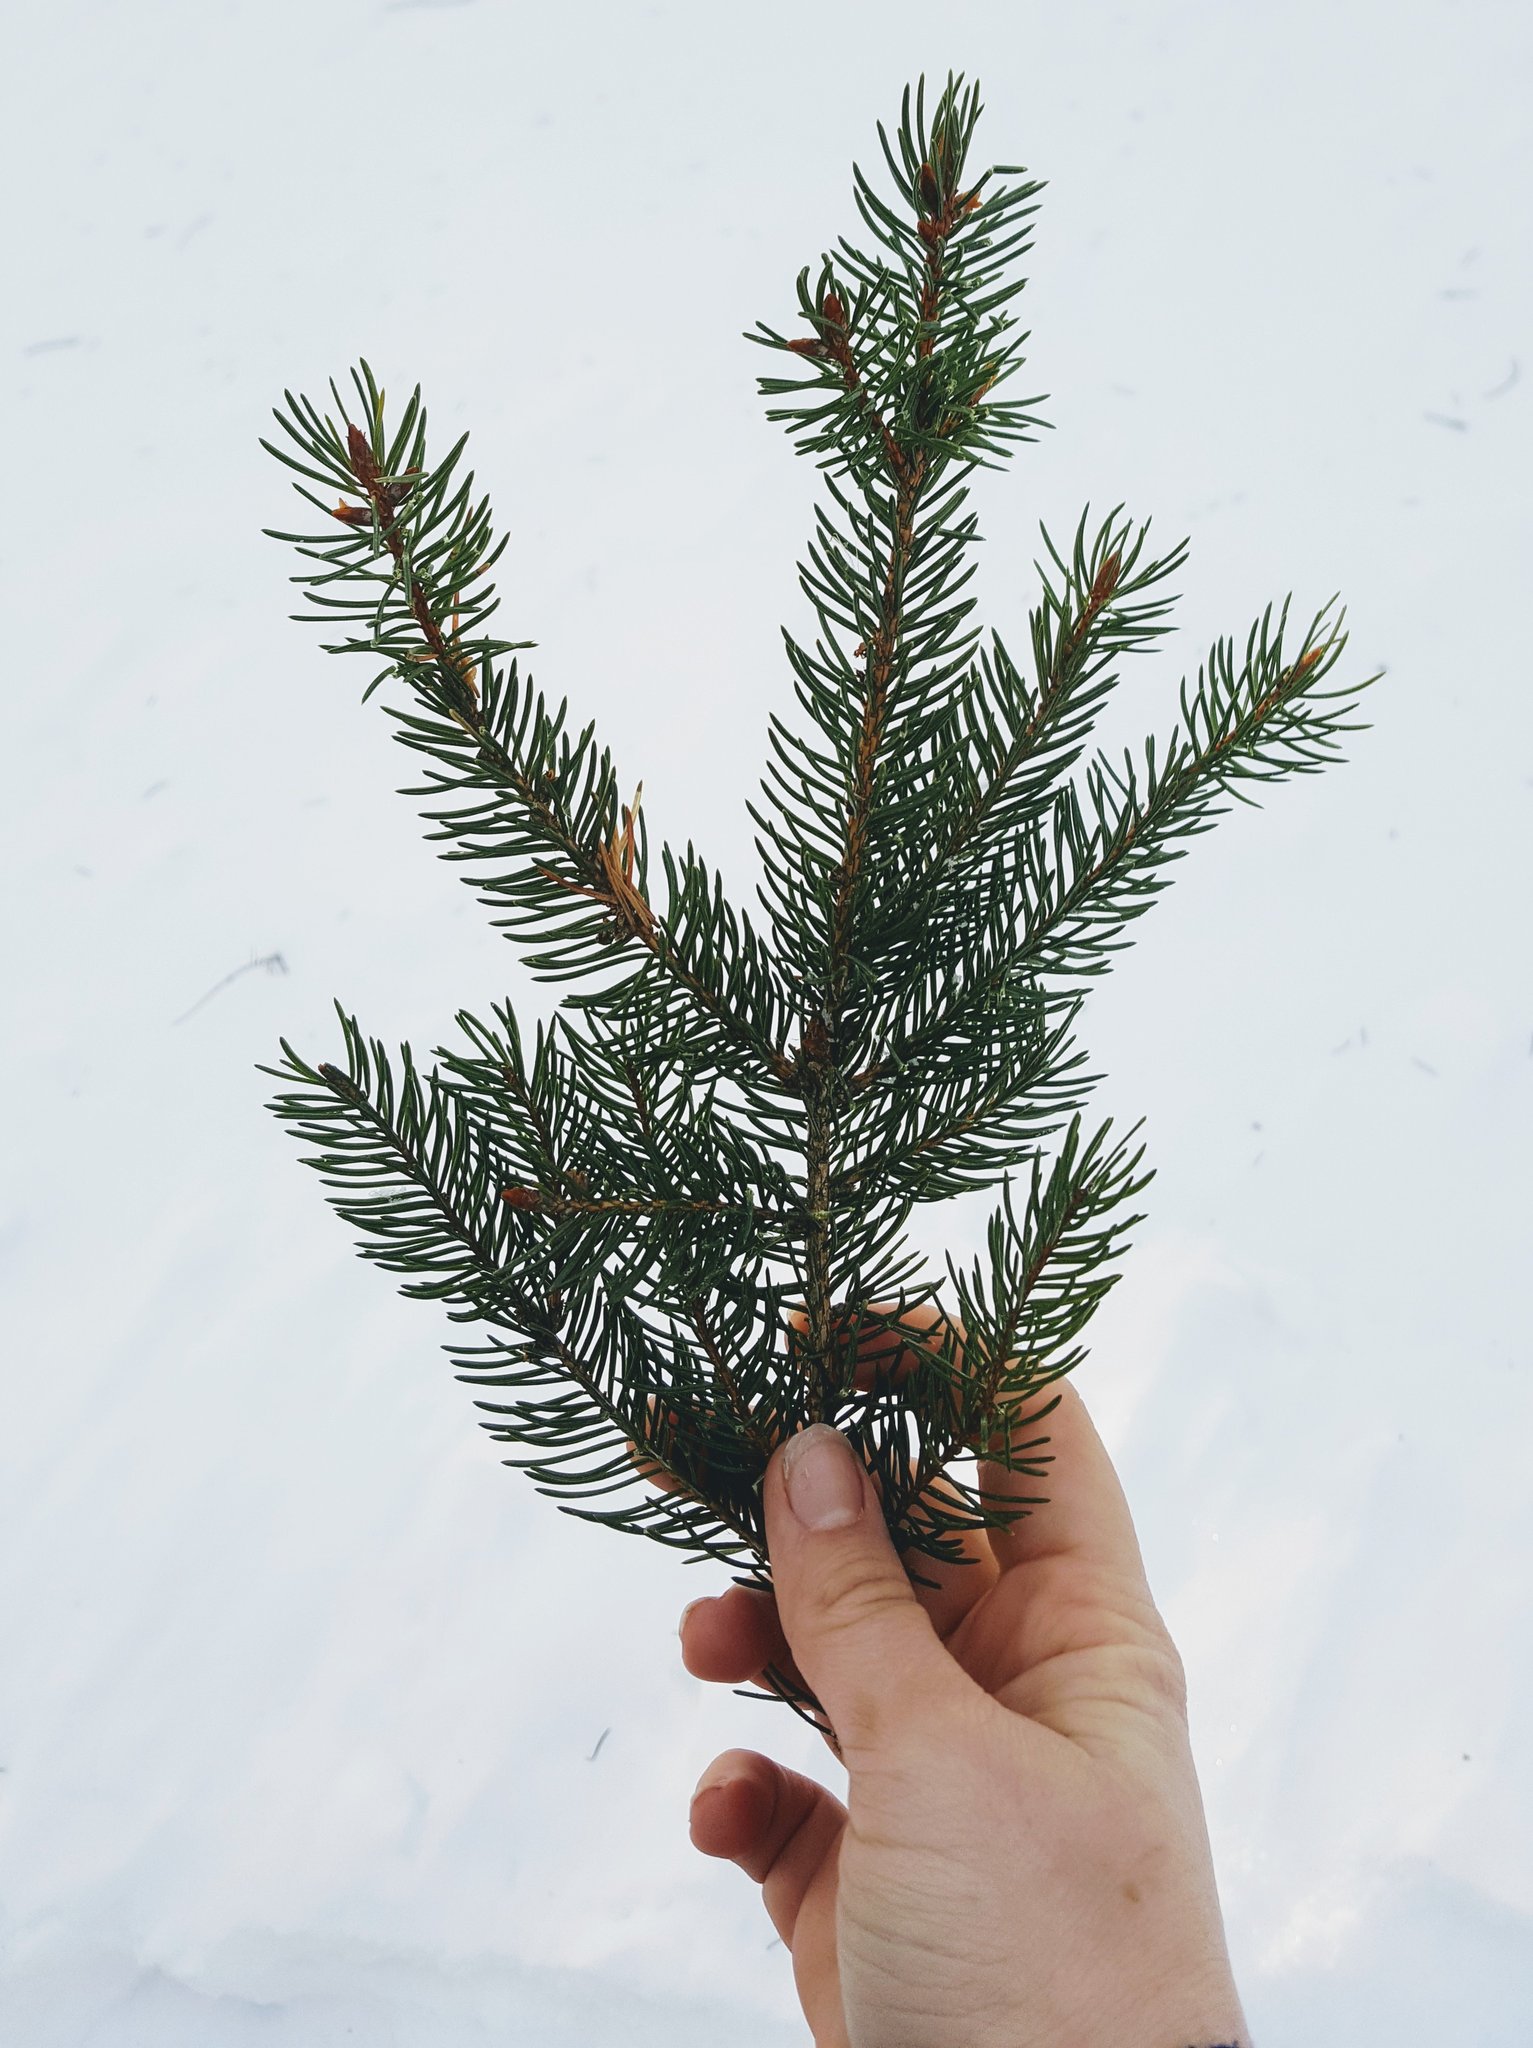 A hand, holding a sprig of pine against a backdrop of snow